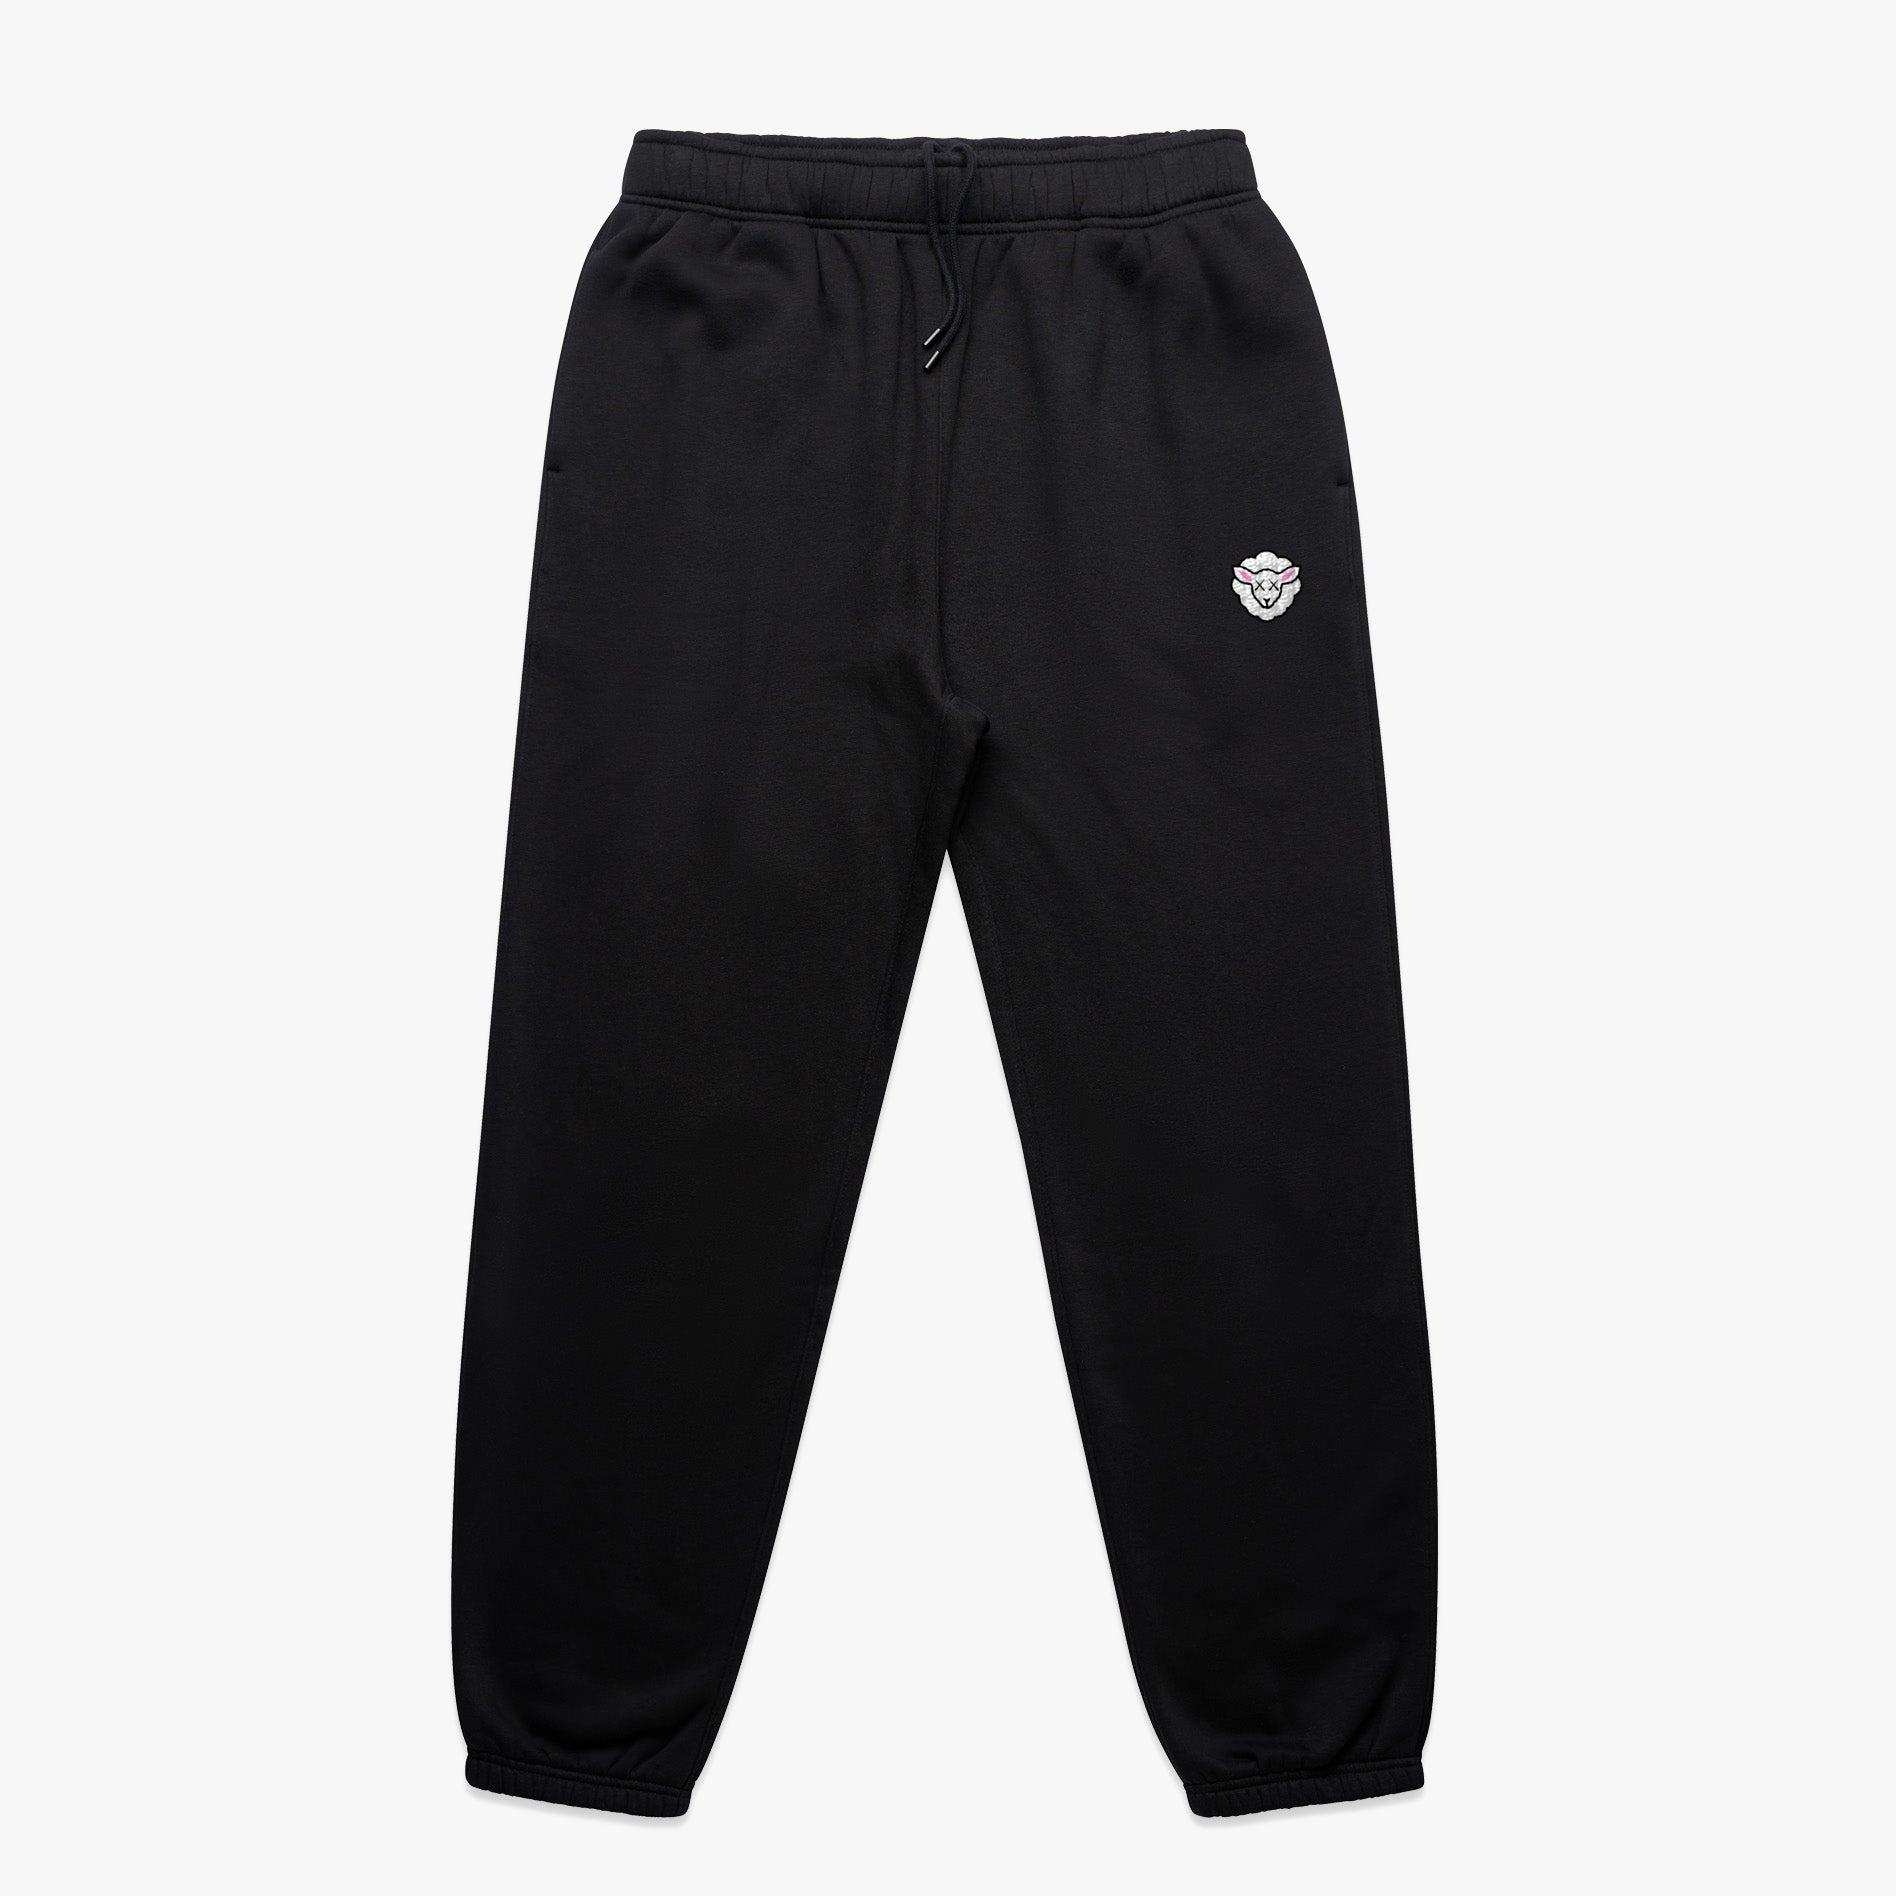 SHEEPEY Staple Relax Trackpants Black